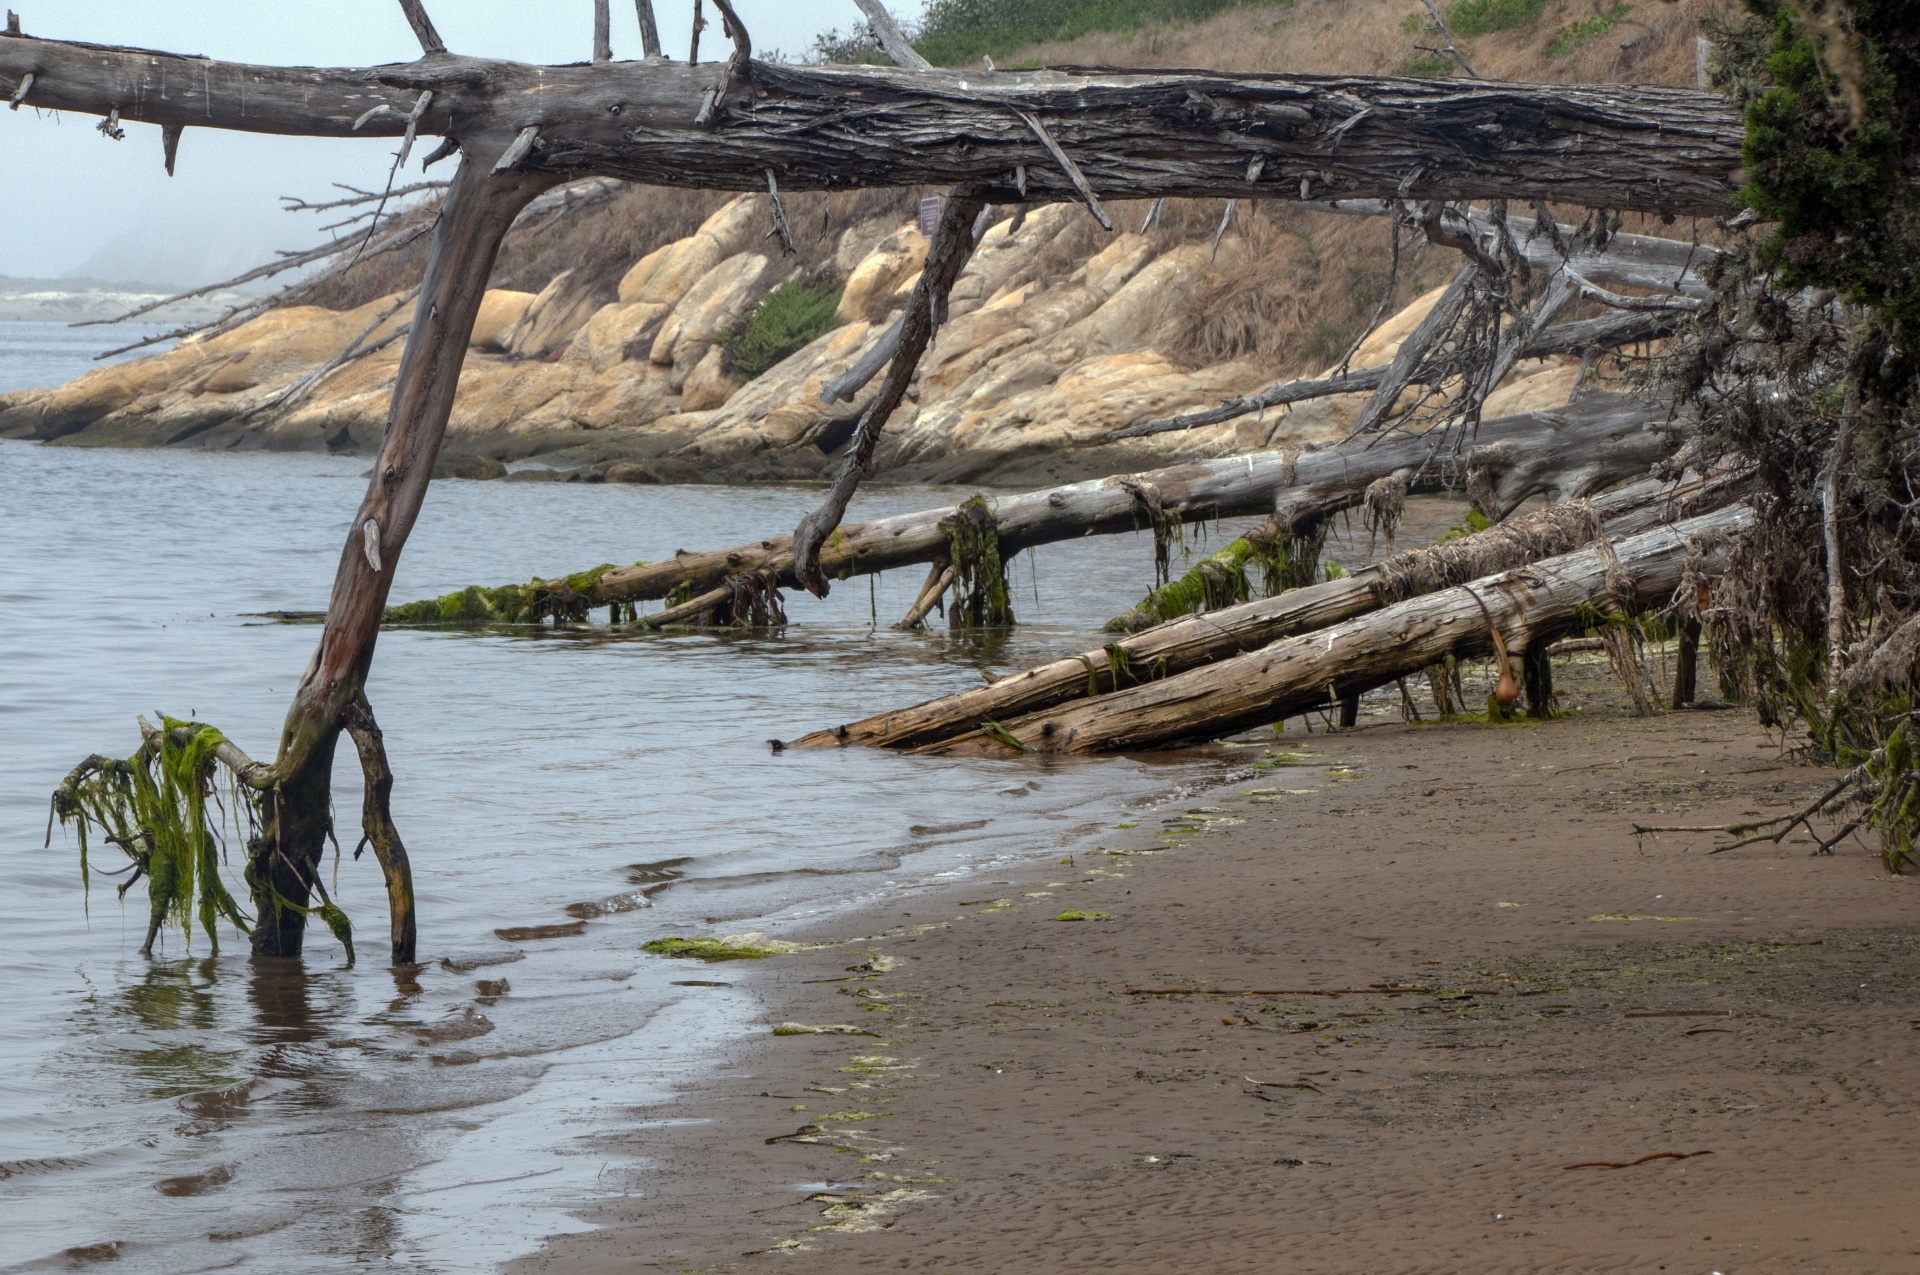 rustic setting of tree logs that have fallen into the bay